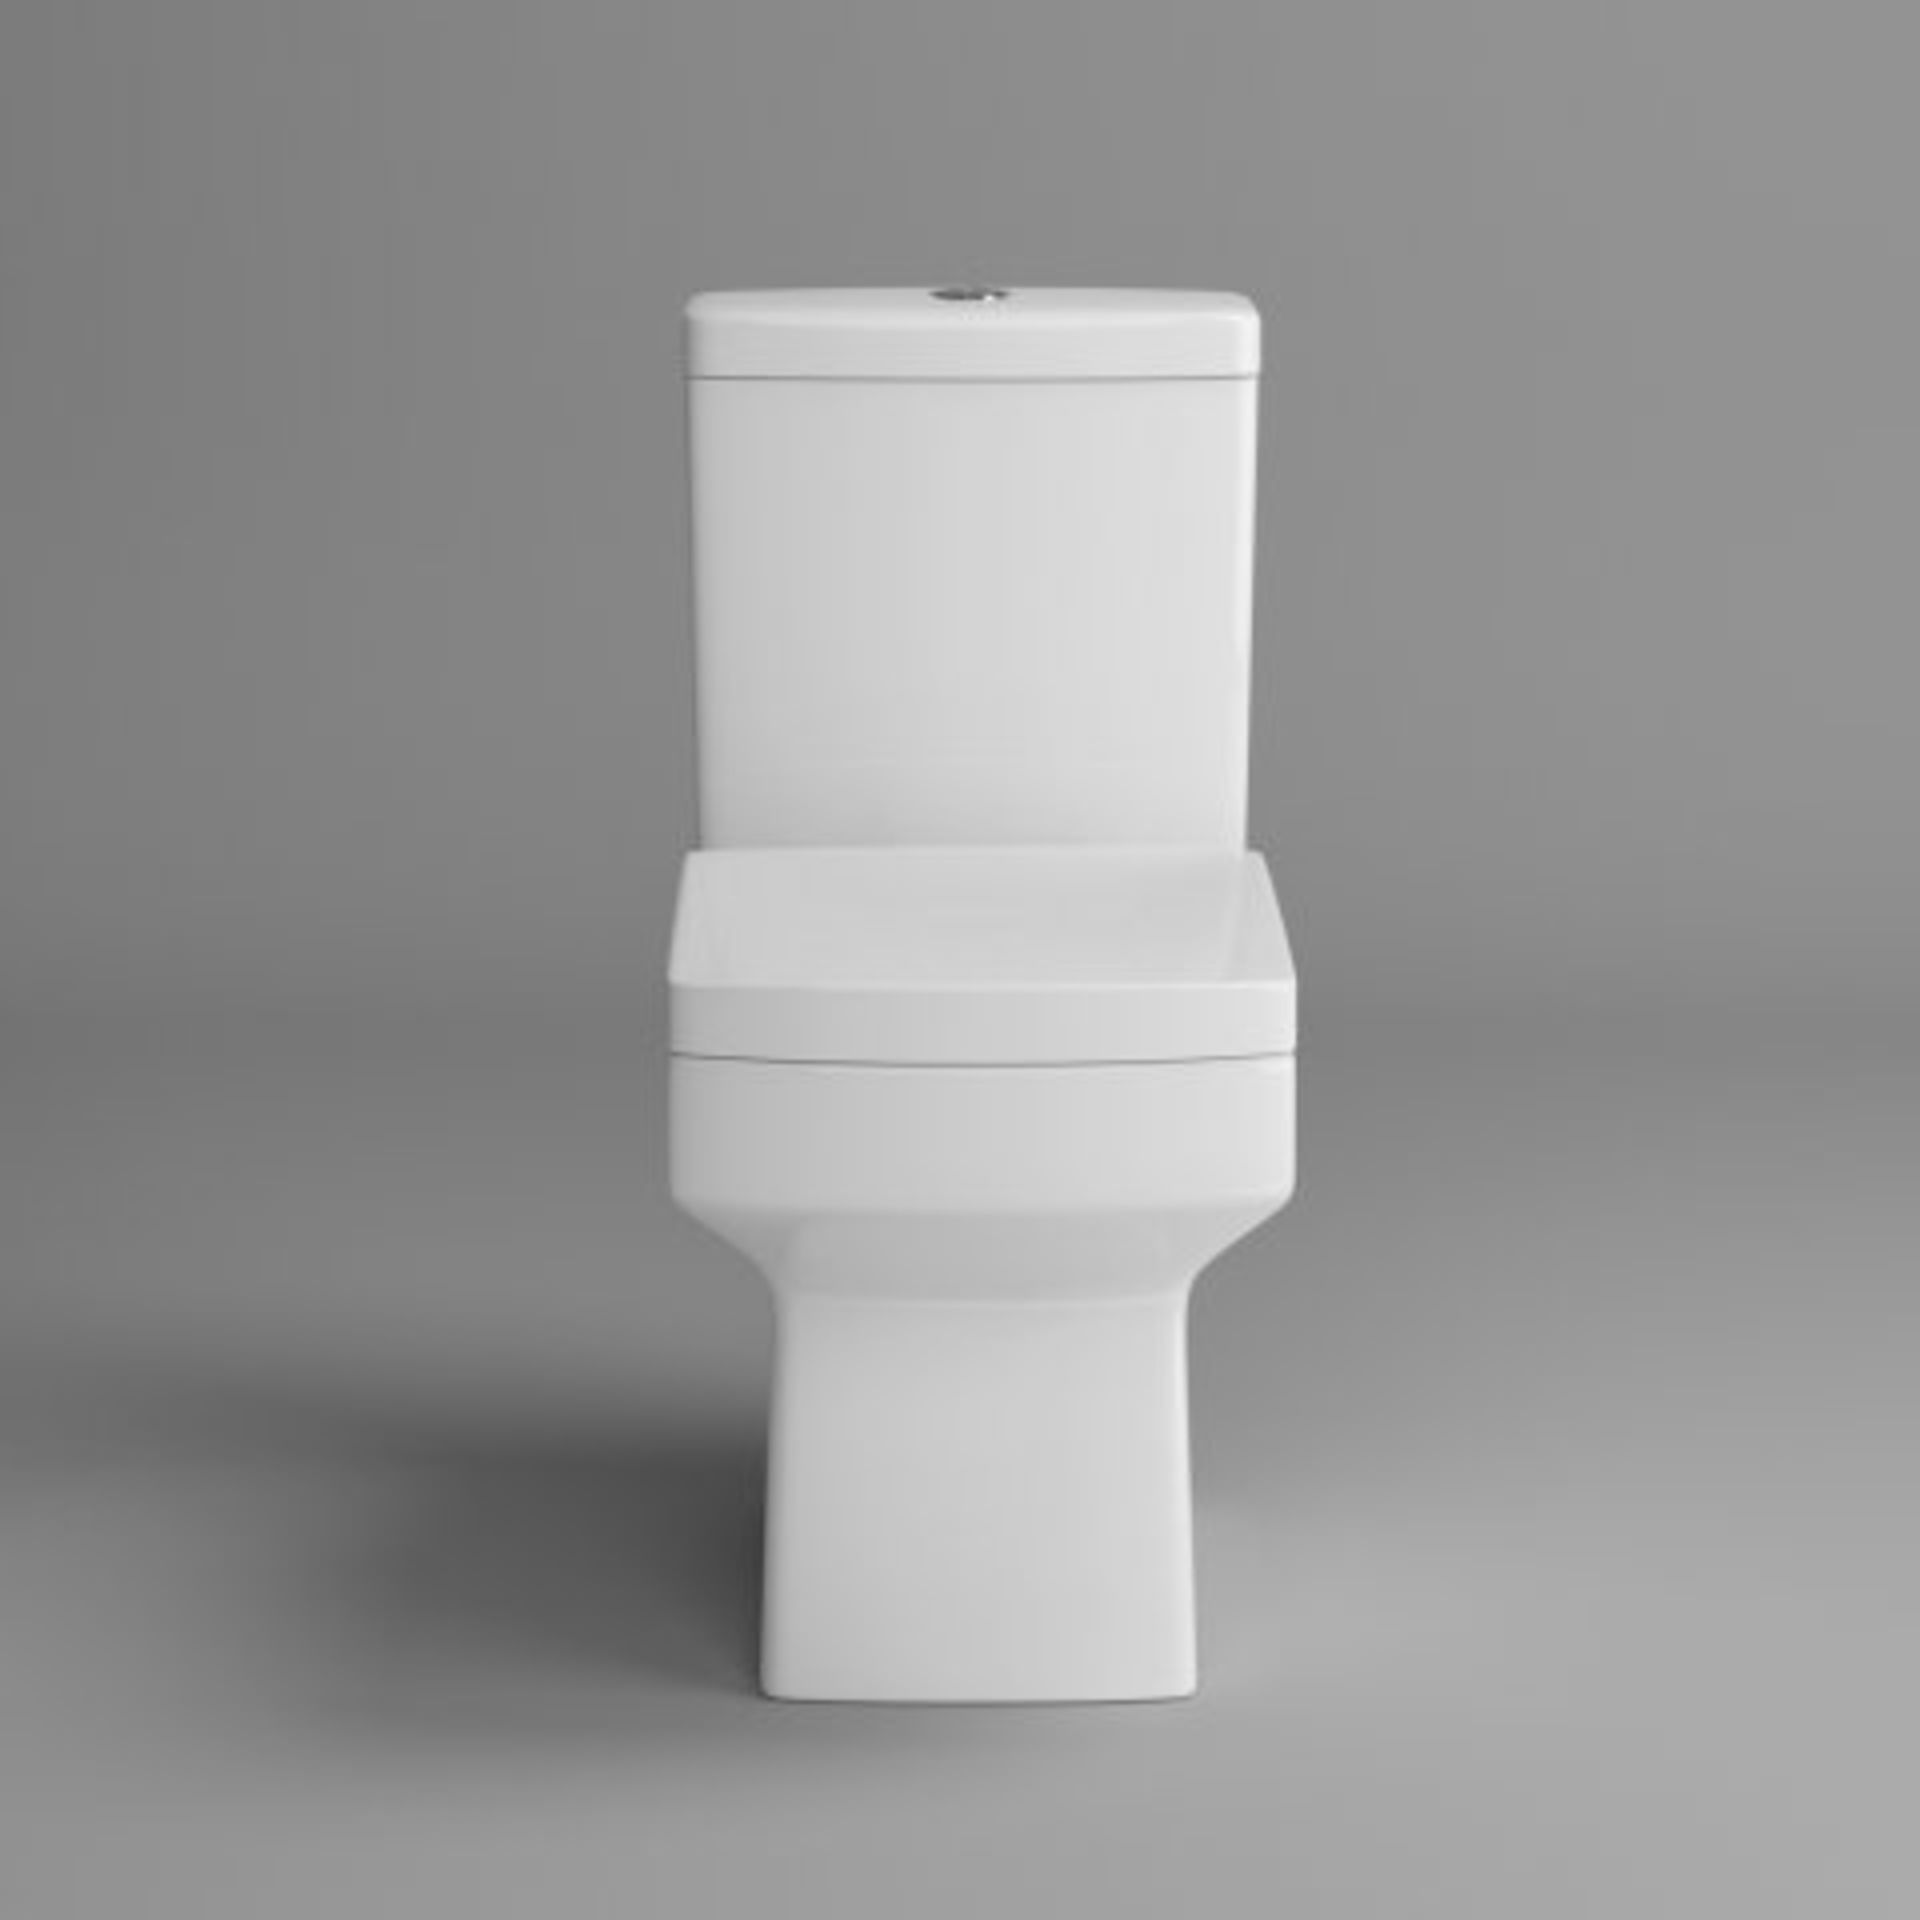 New Belfort Close Coupled Toilet & Pedestal Basin Set Rrp £779.99 Manufactured From High Qual... - Image 2 of 2